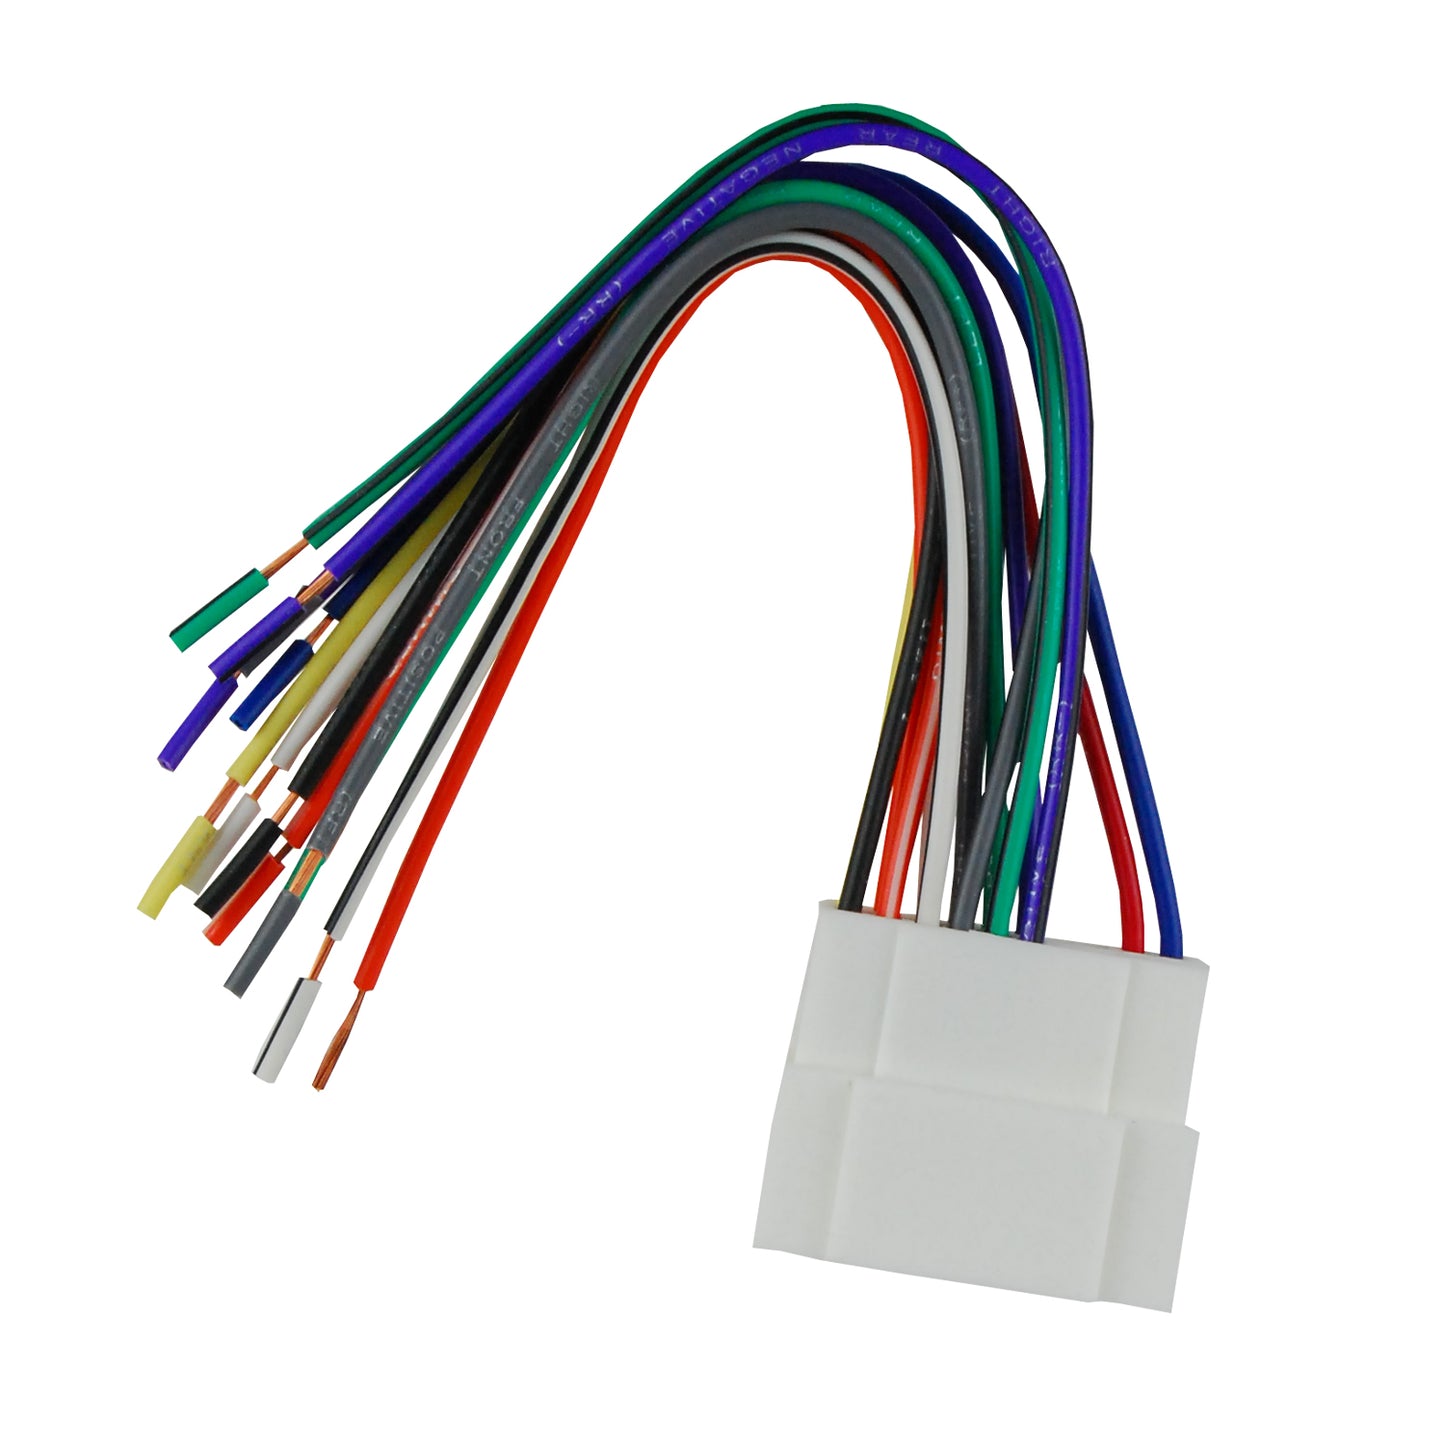 WH-ACU 9810 - Wiring Harness